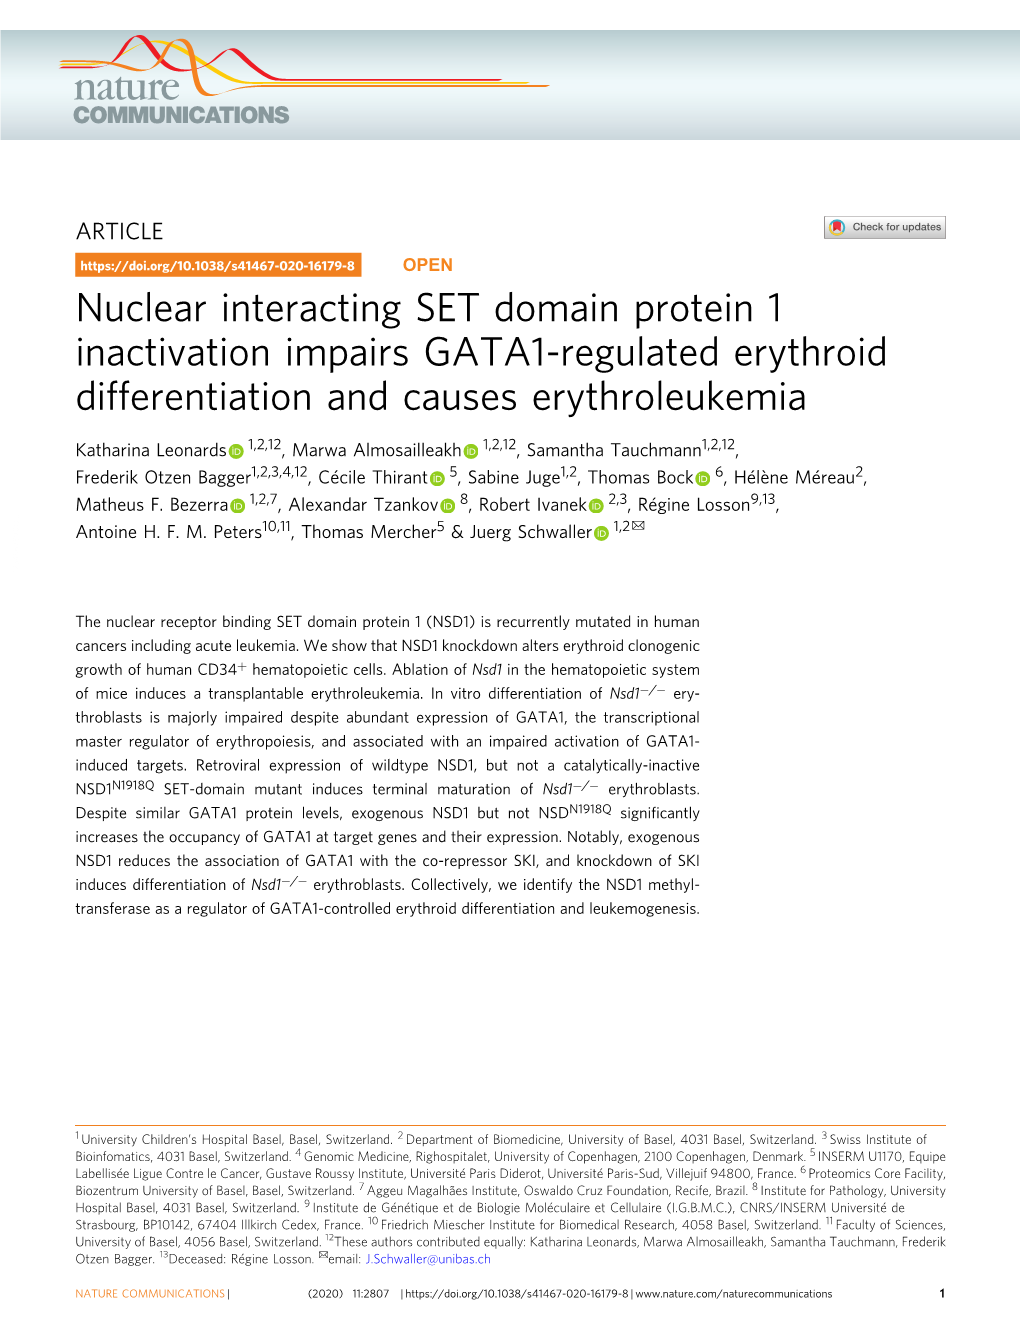 Nuclear Interacting SET Domain Protein 1 Inactivation Impairs GATA1-Regulated Erythroid Differentiation and Causes Erythroleukemia